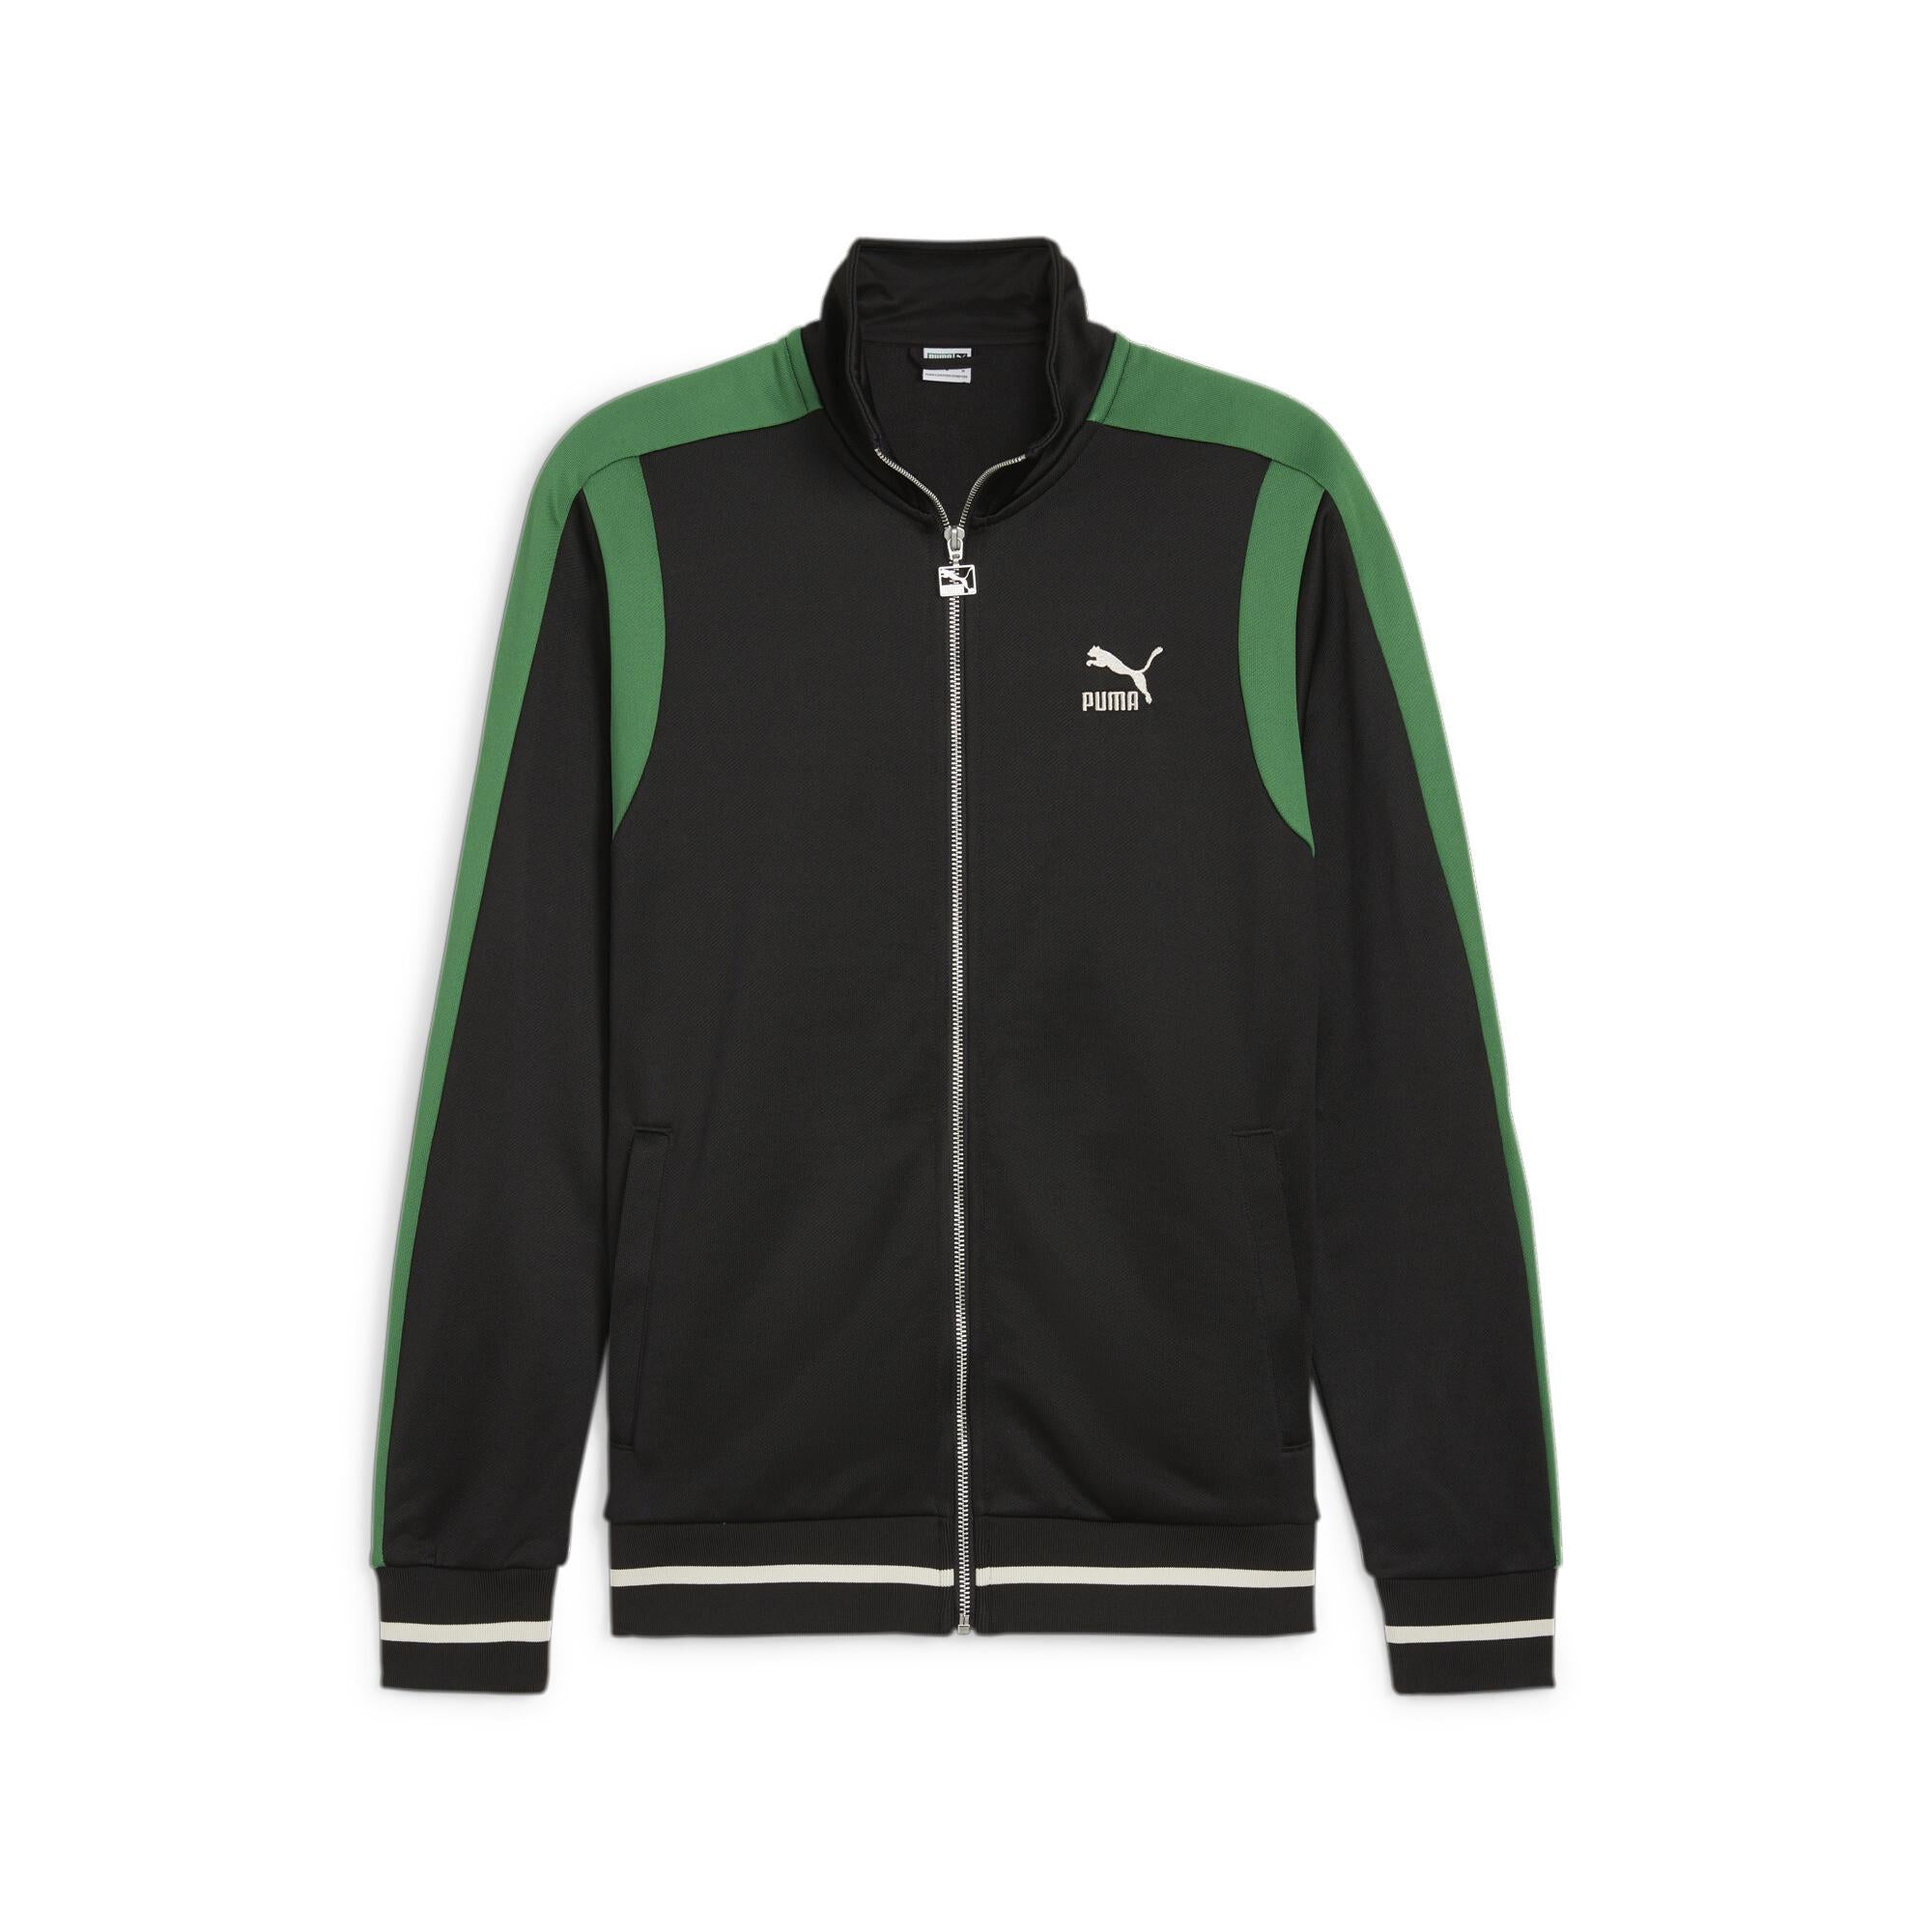 FOR THE FANBASE T7 TRACK JACKET